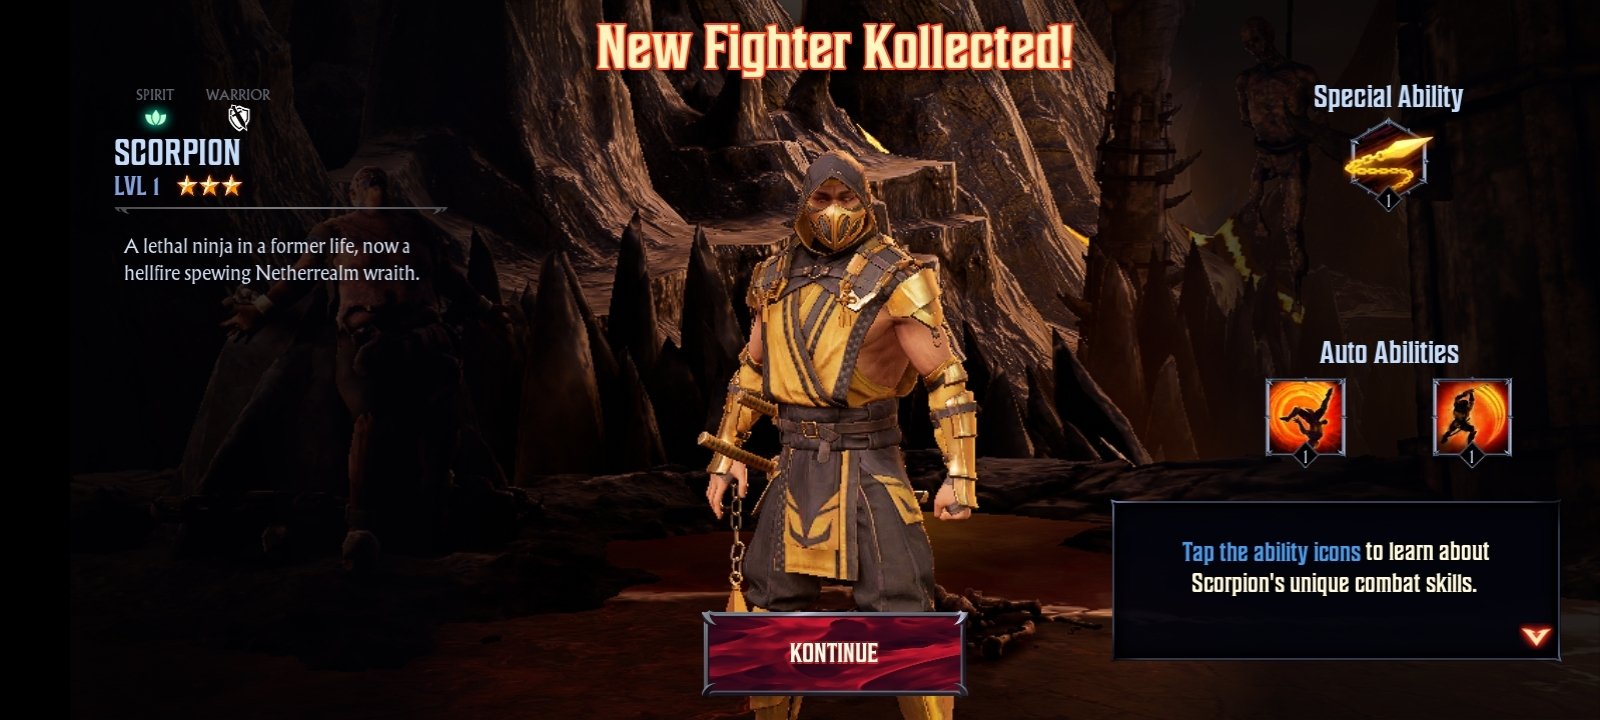 Mortal Kombat: Onslaught Mobile RPG is Available Free to Play Now